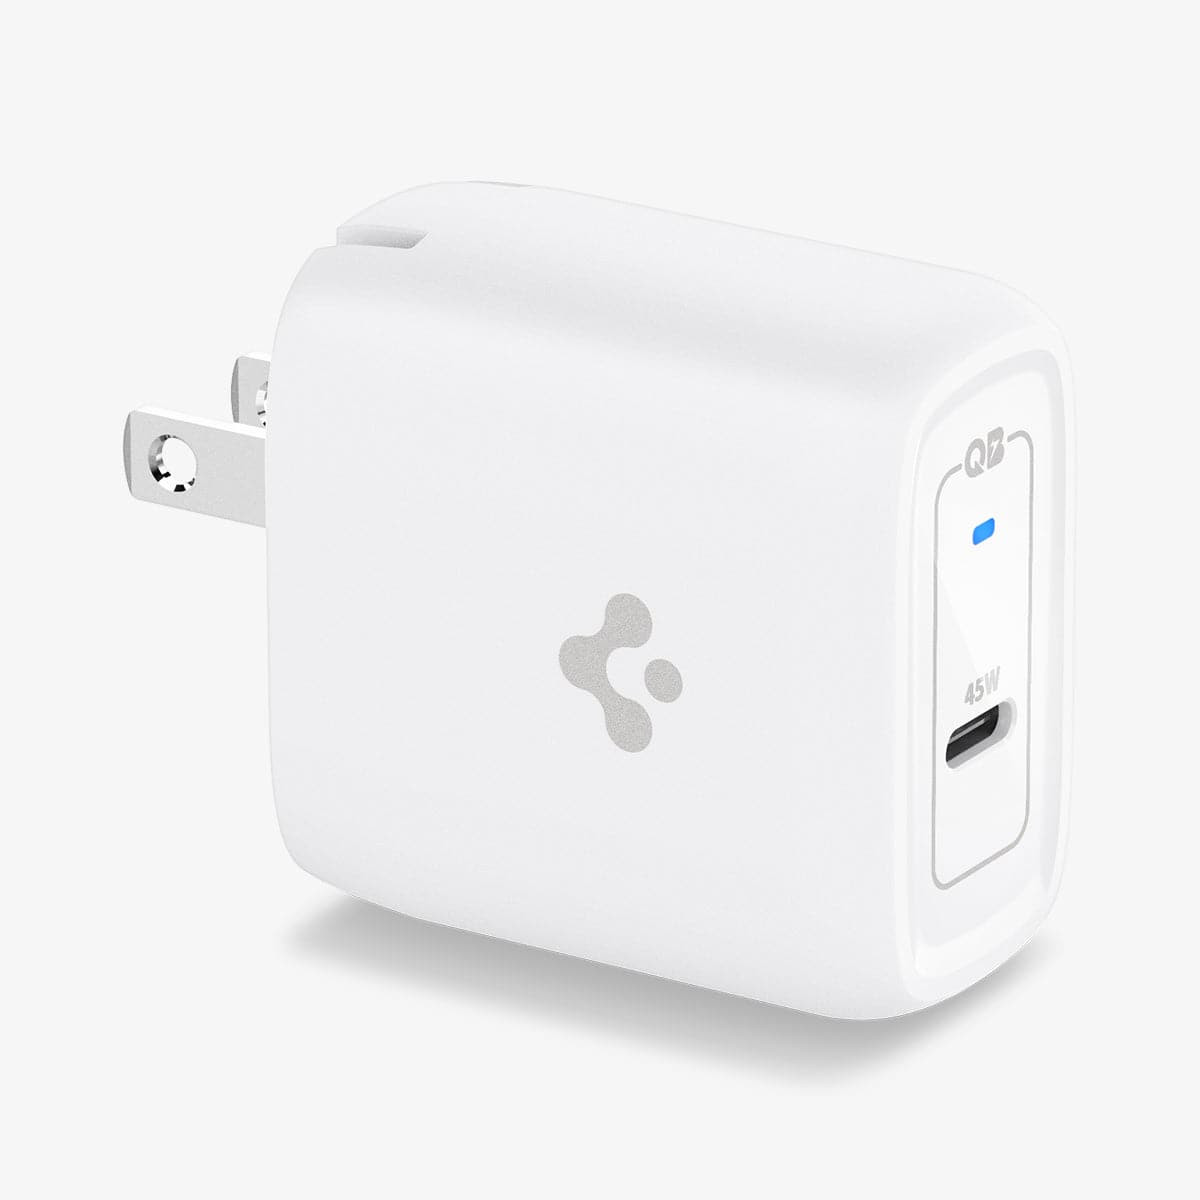 ACH02587 - ArcStation™ Pro 45W Wall Charger PE2015 in white showing the front, side and top